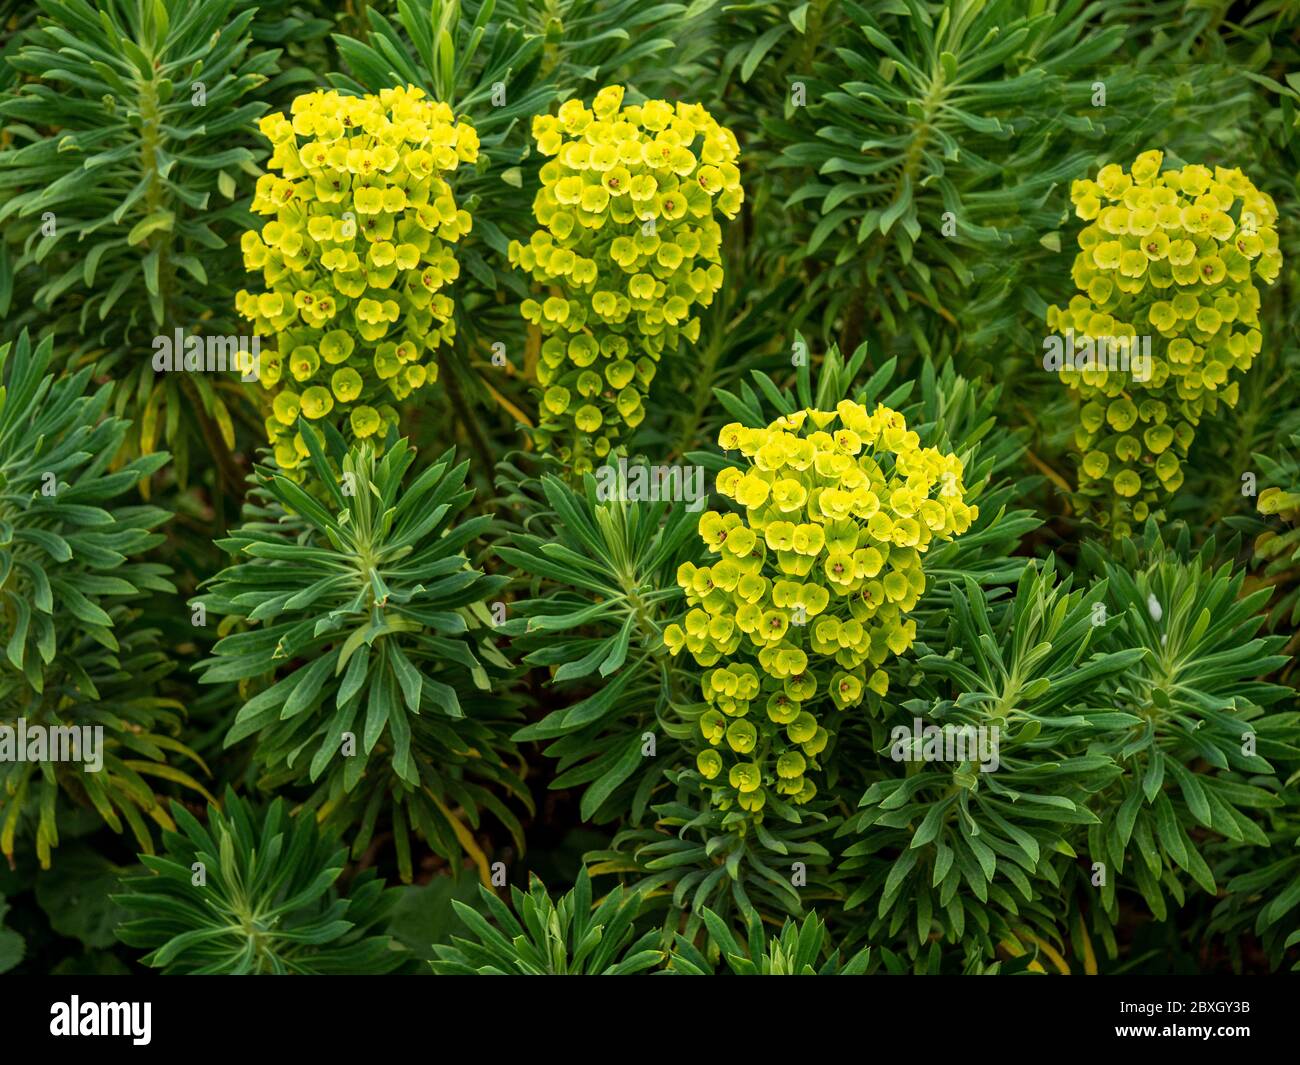 Yellow flowers and green leaves of a Euphorbia plant in a garden Stock Photo